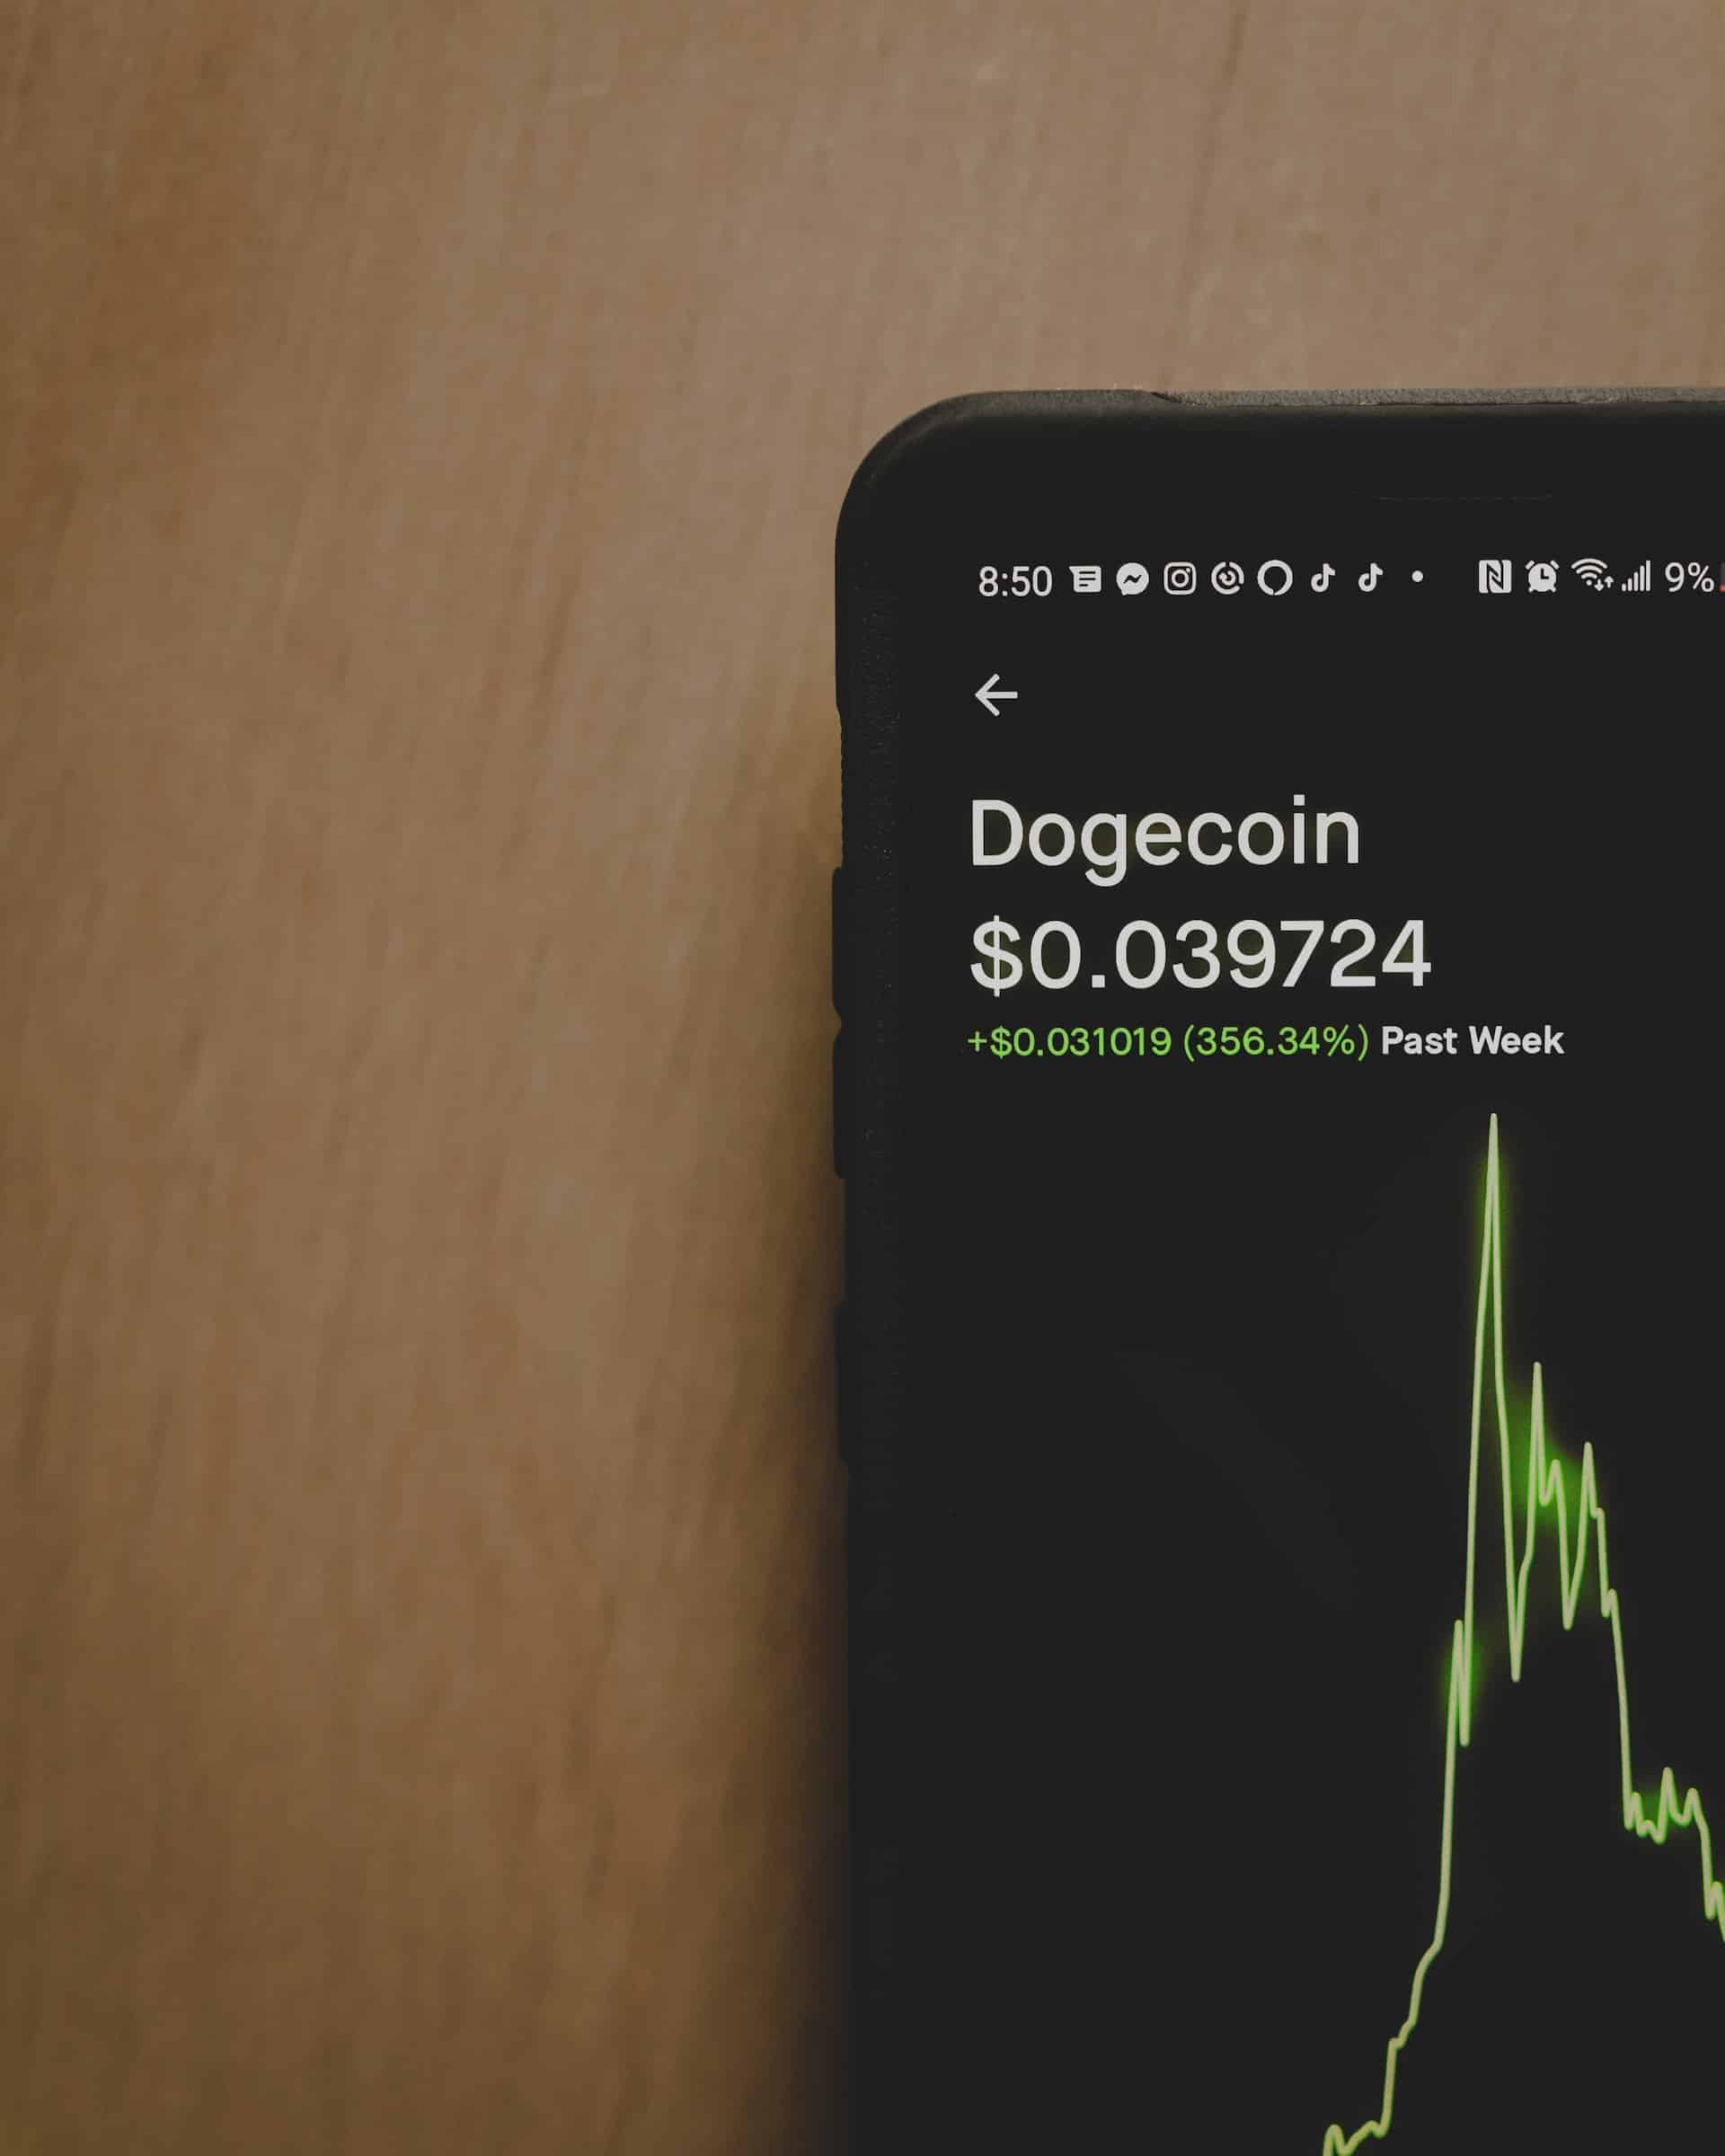 Cardano Dogecoin Hit Dollar First Article Image